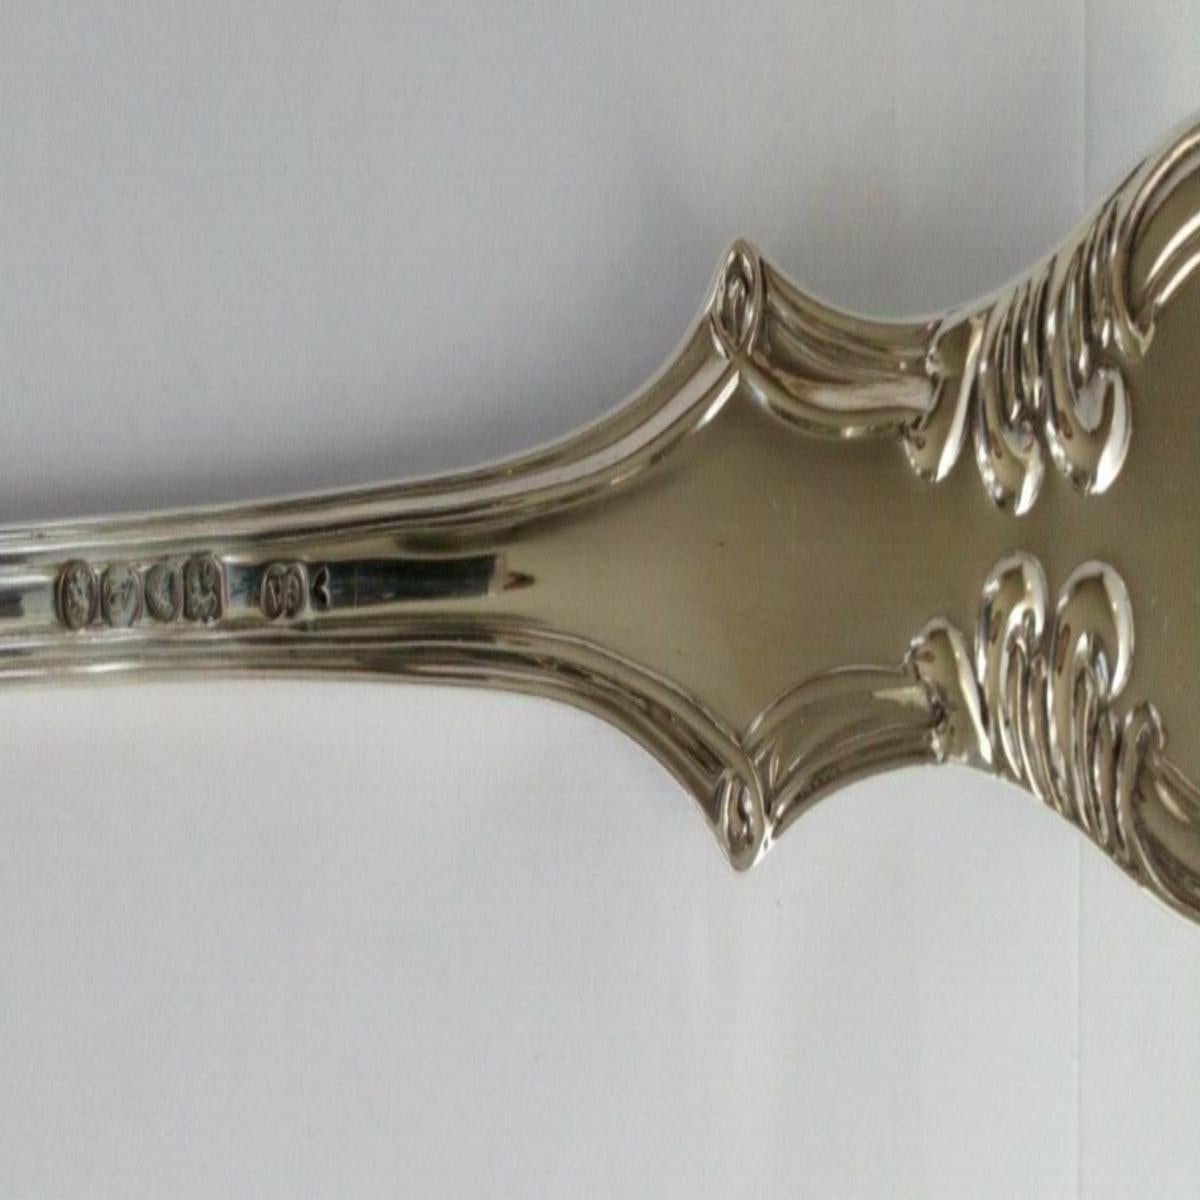 Victorian Sterling Silver Ladle by Chawner & Co, 1859 For Sale 7